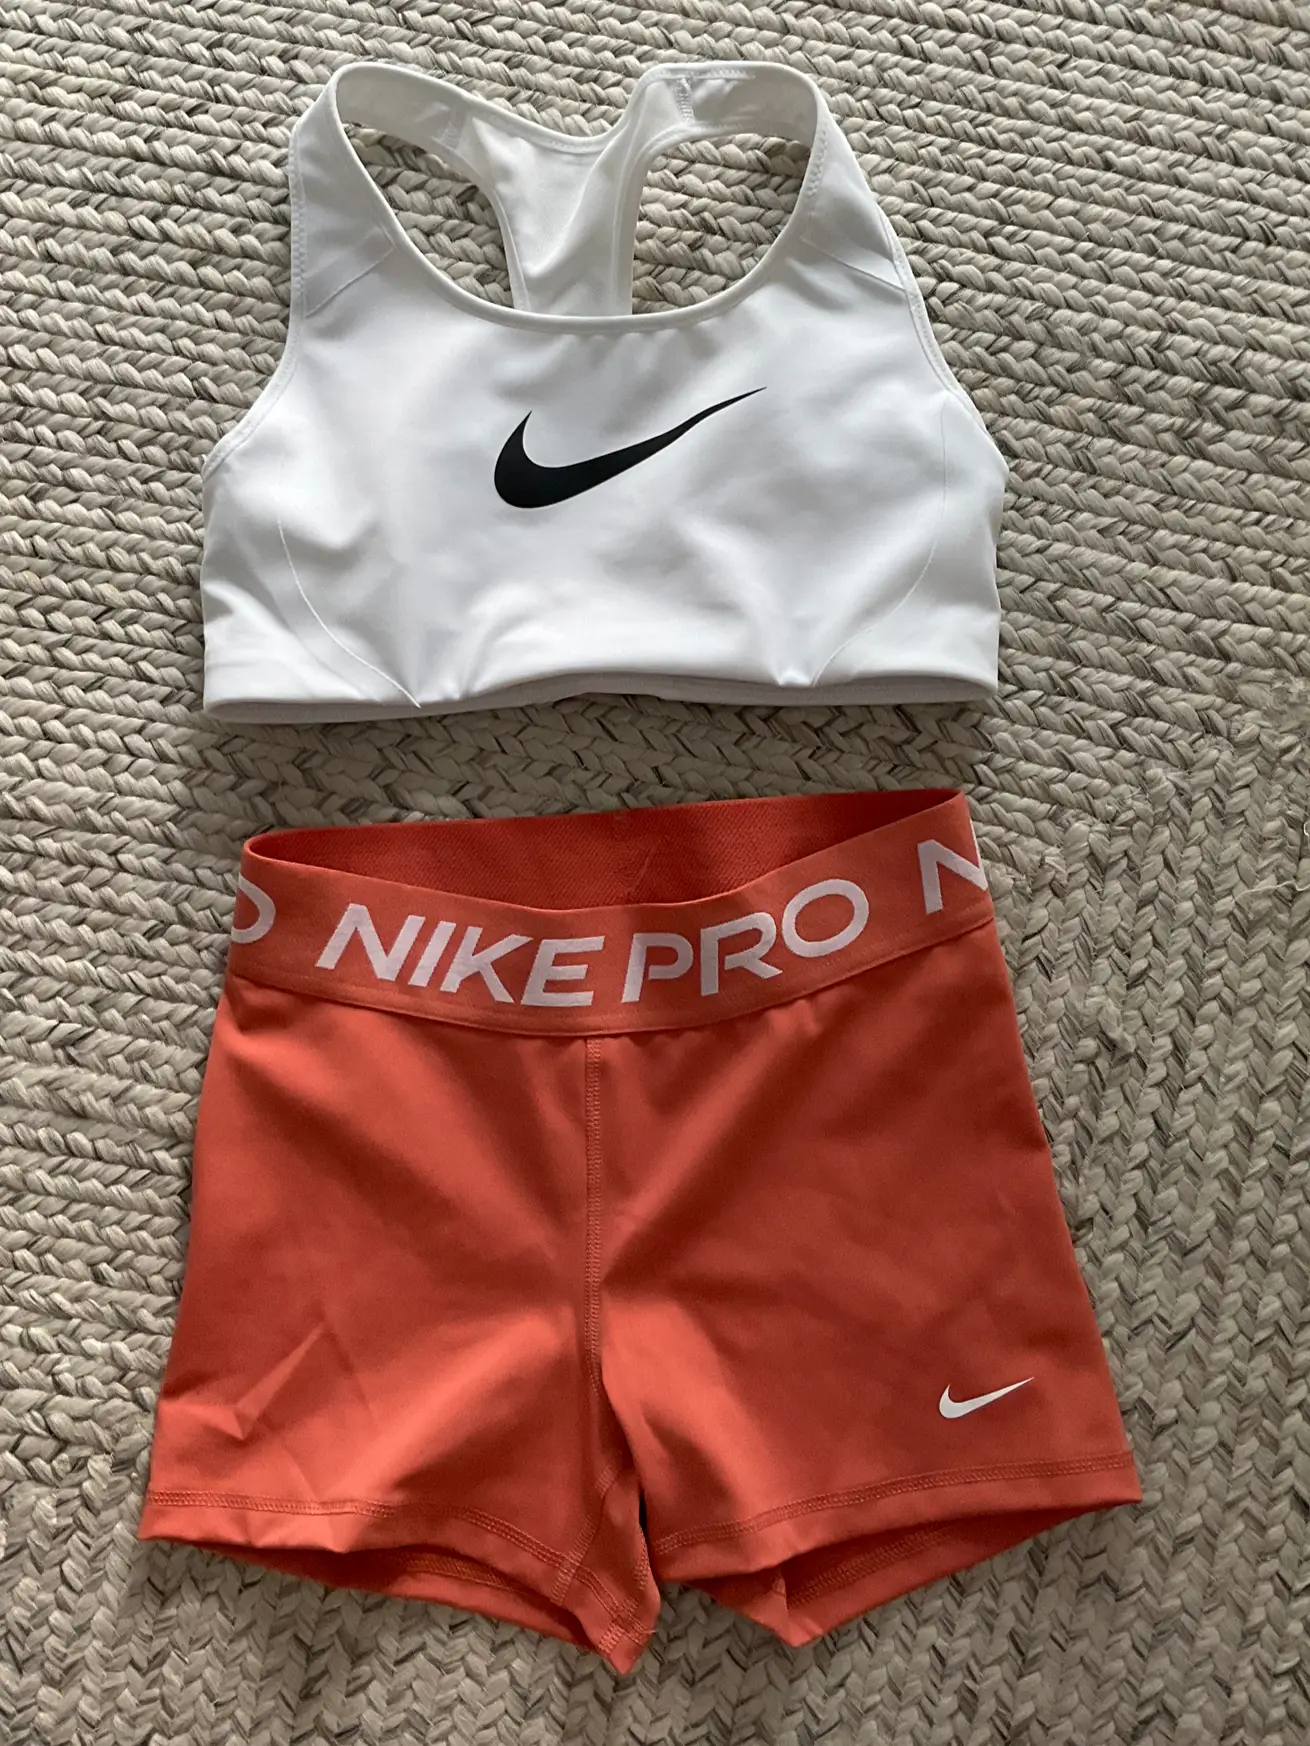 Nike activewear try-on, Gallery posted by allison.buch